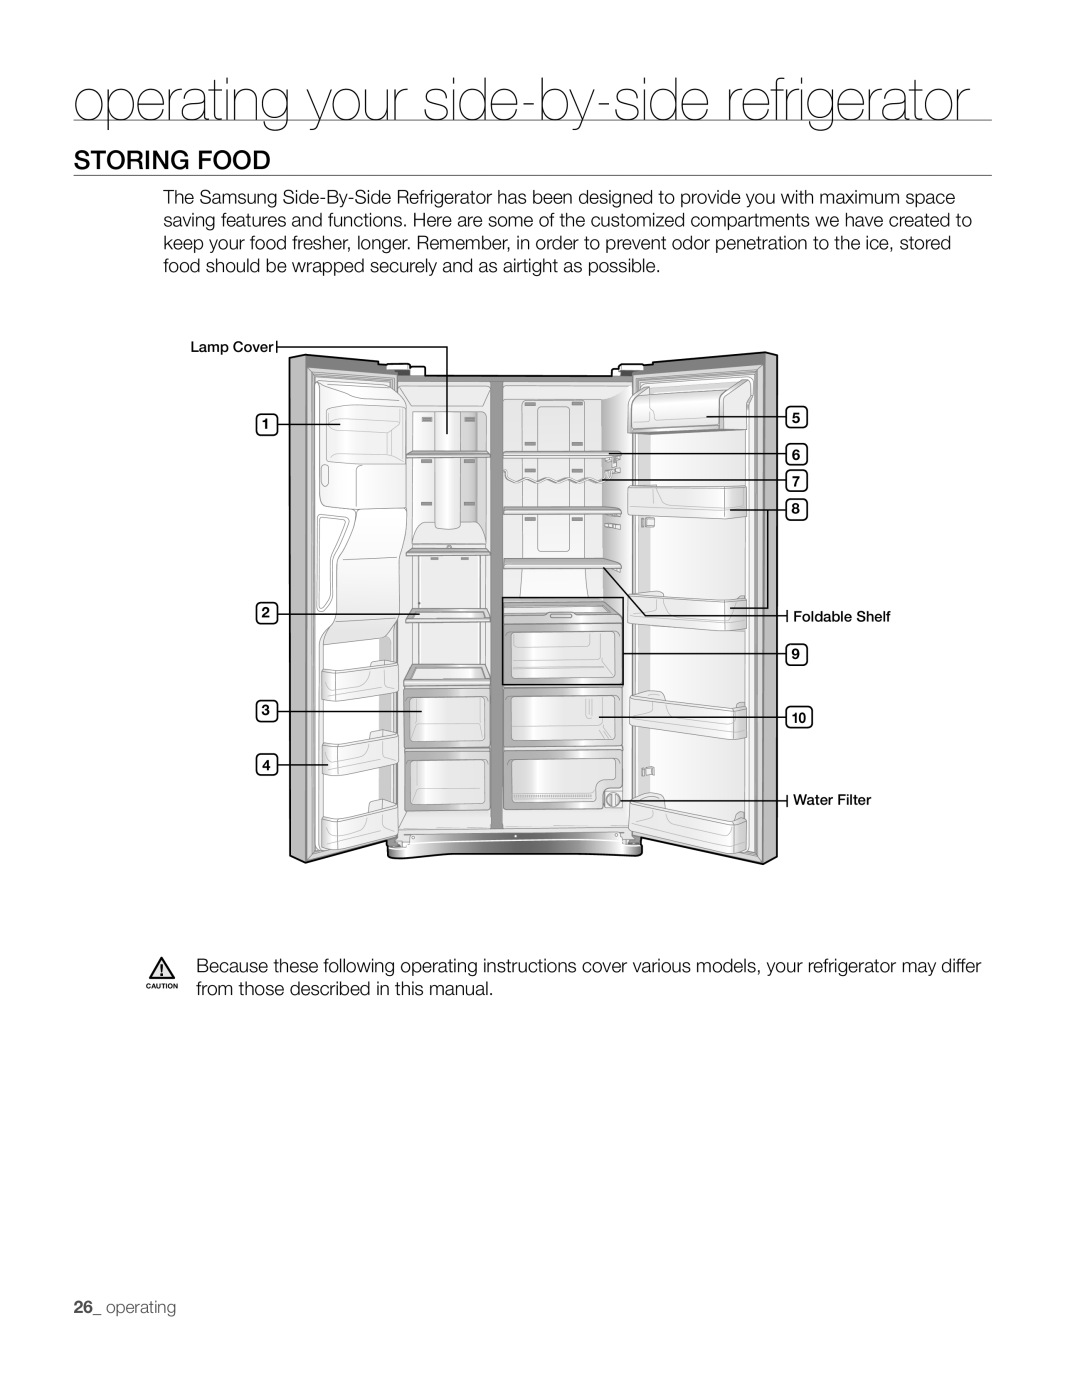 Samsung RS267TDPN user manual Storing Food, operating your side-by-side refrigerator 